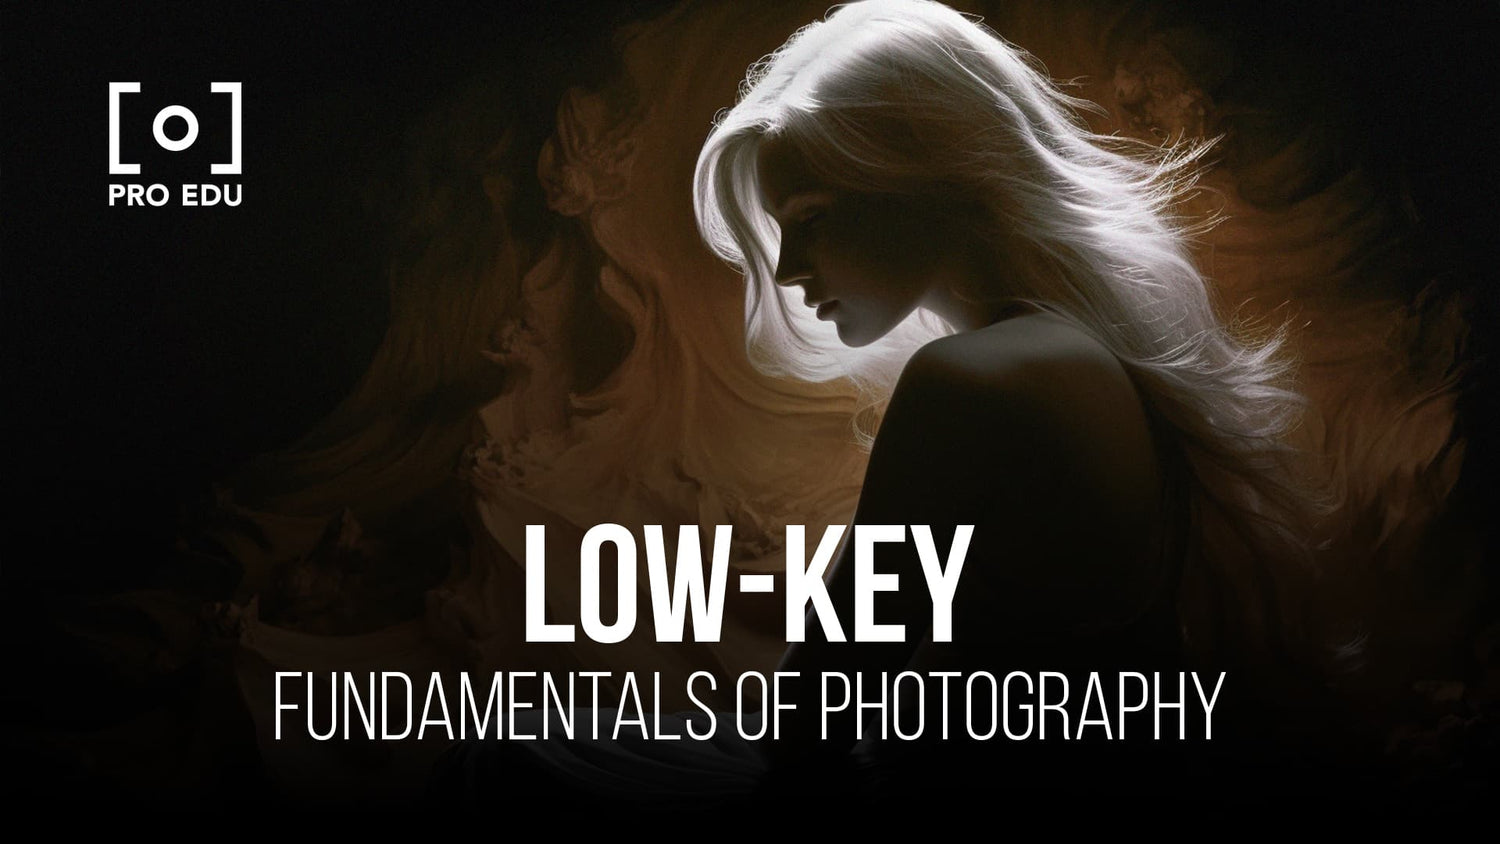 Mastering the art of shadows in low-key photography for dramatic effect